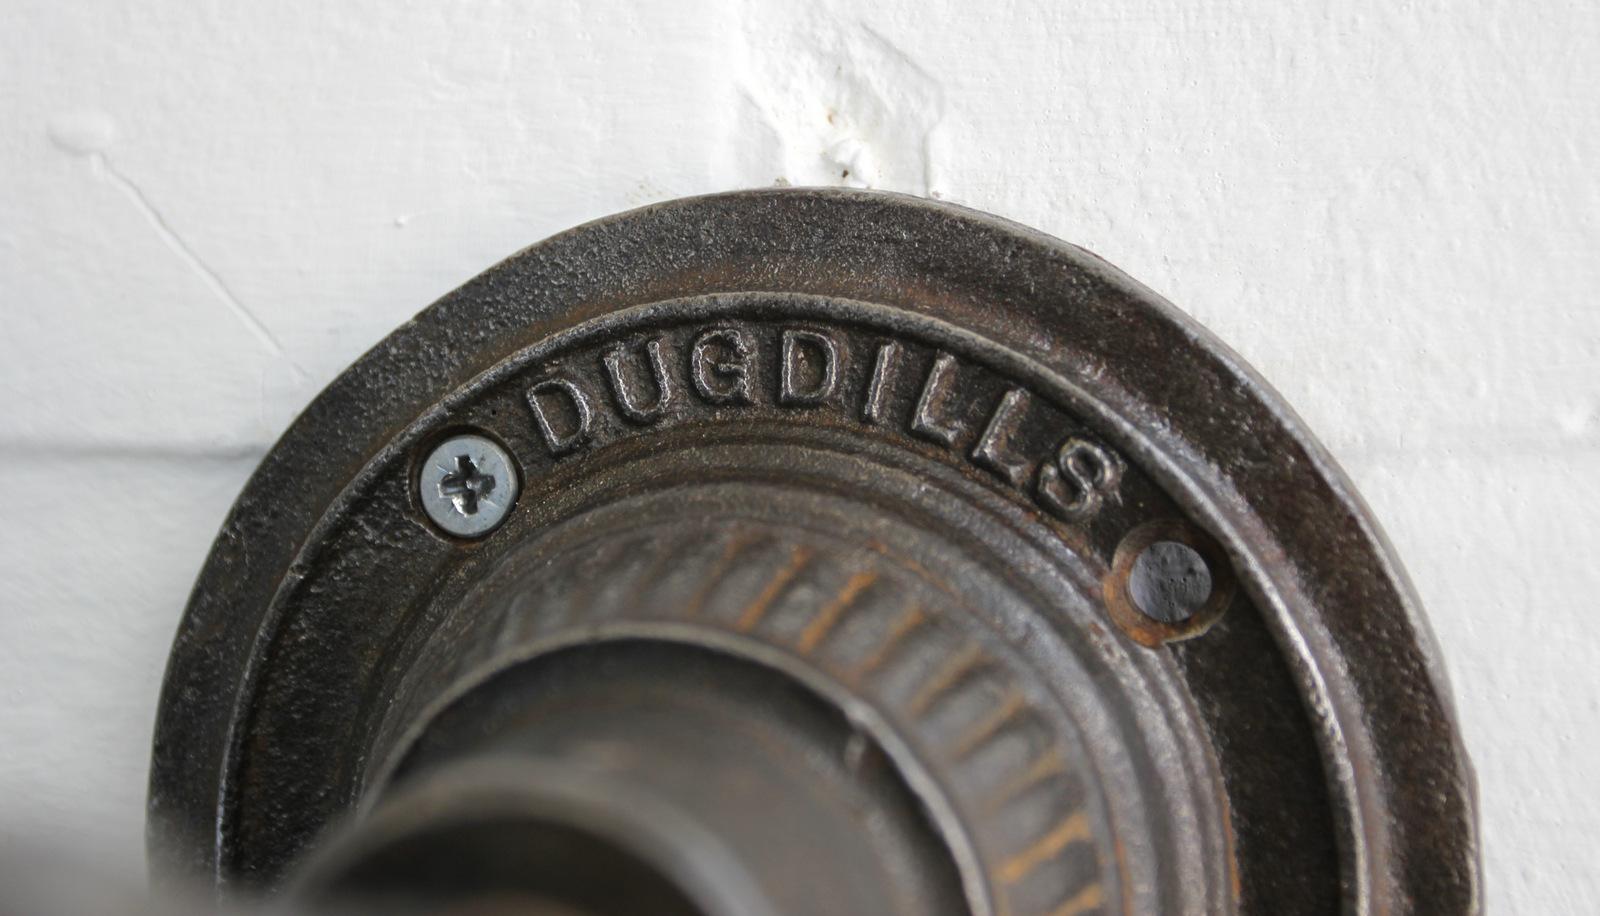 Large Wall-Mounted Industrial Task Lamp by Dugdills, circa 1920s 2